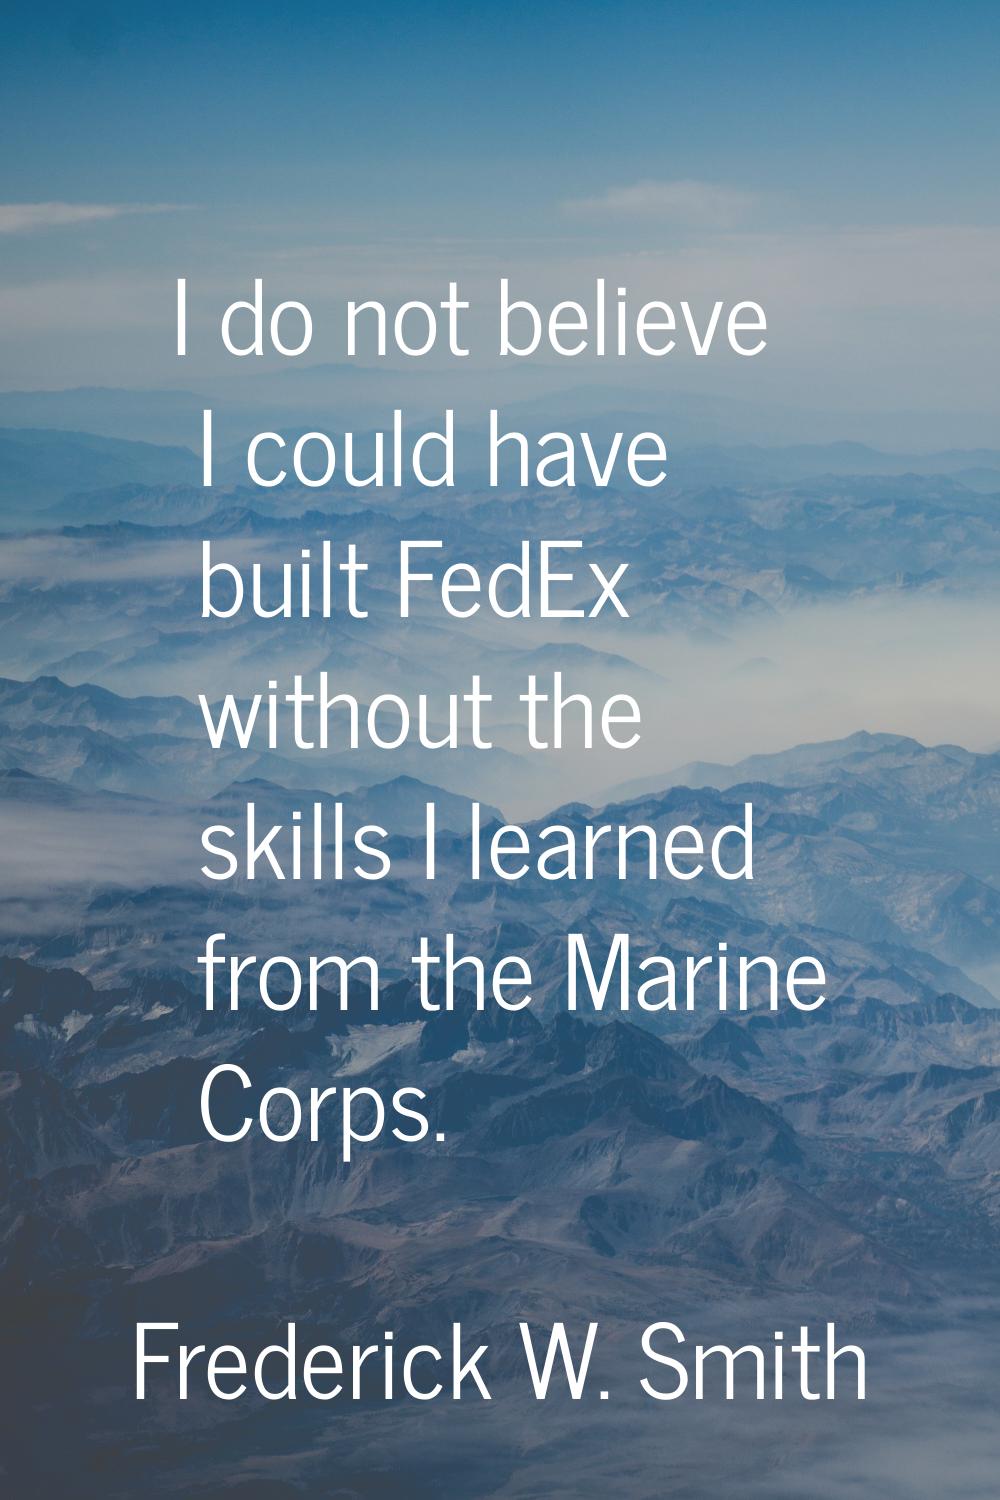 I do not believe I could have built FedEx without the skills I learned from the Marine Corps.